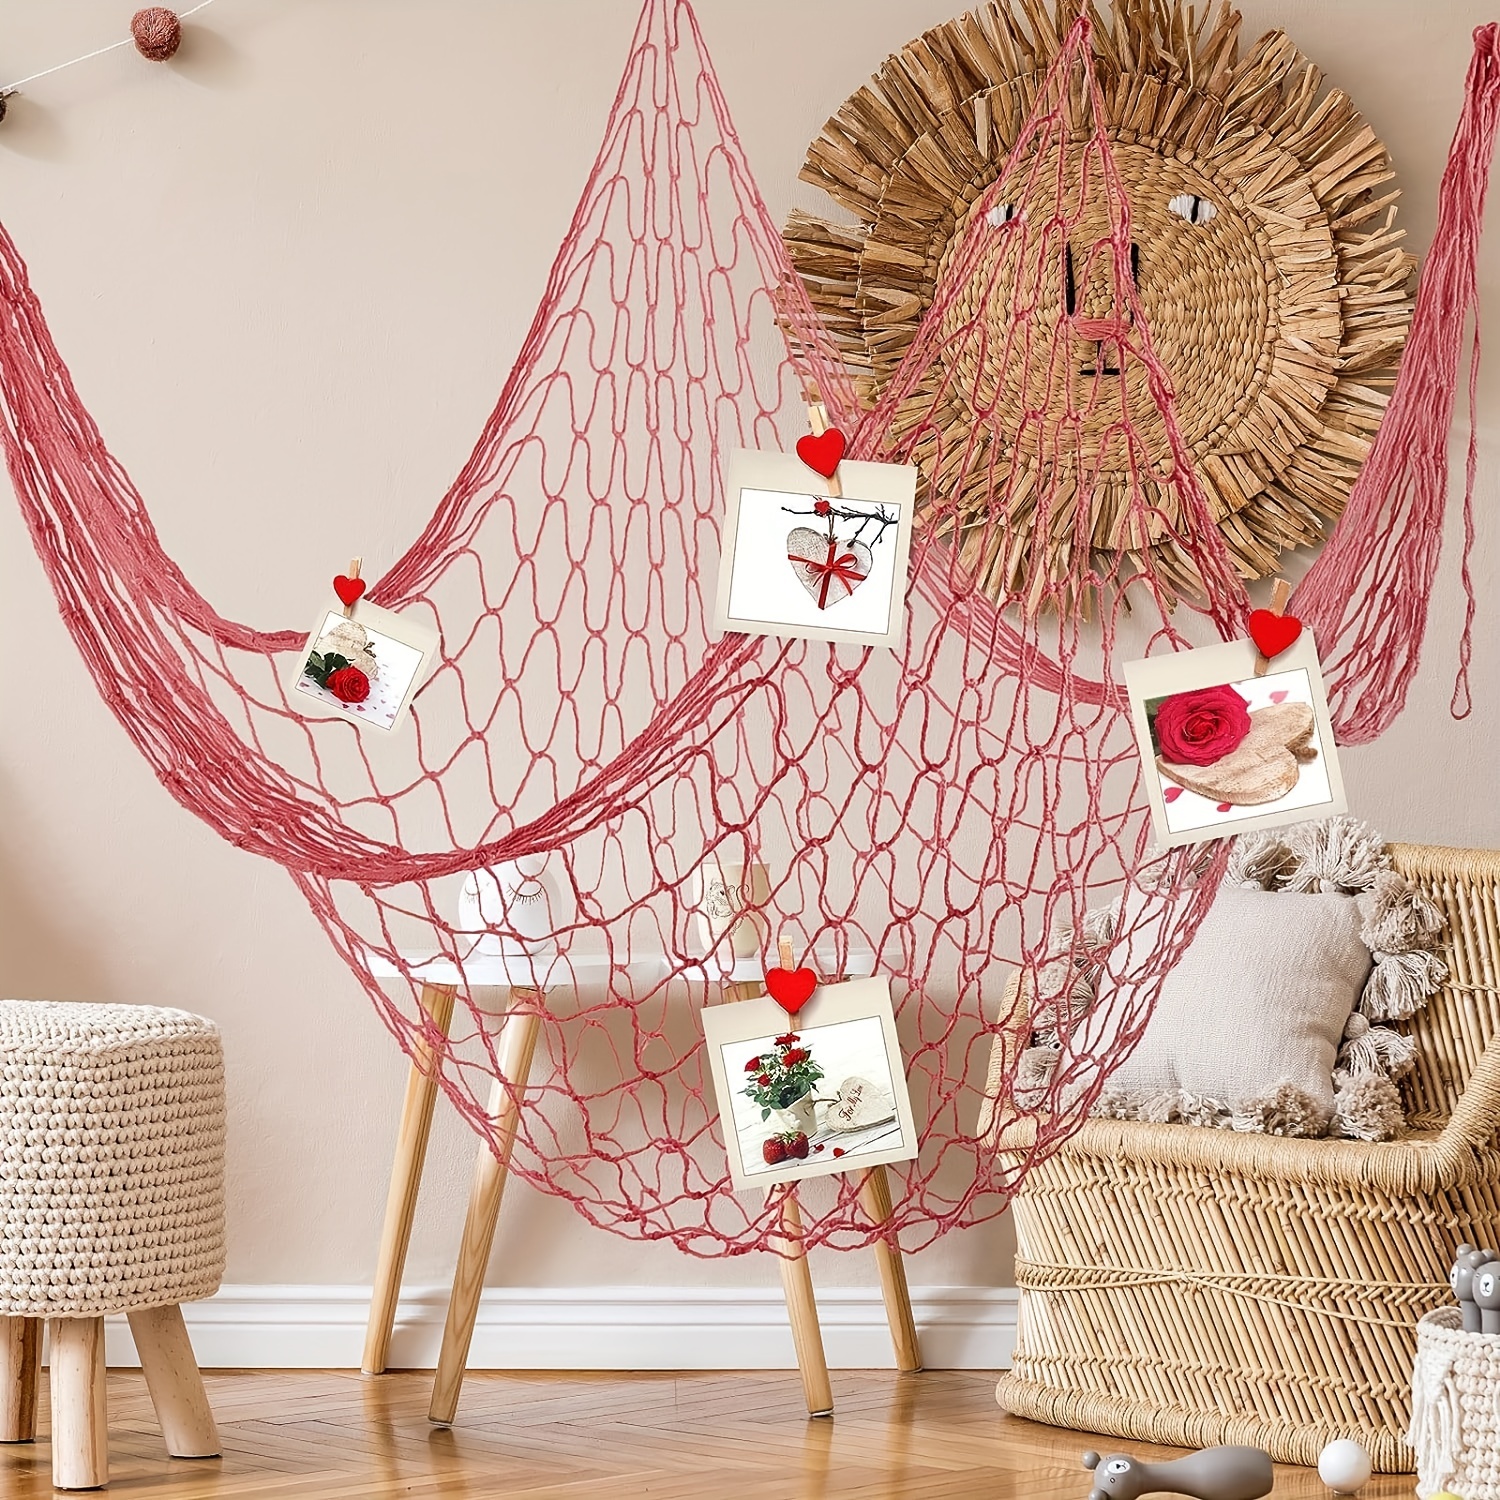 Fishing Net Beach Theme Decor for Party Home Living Room Bedroom